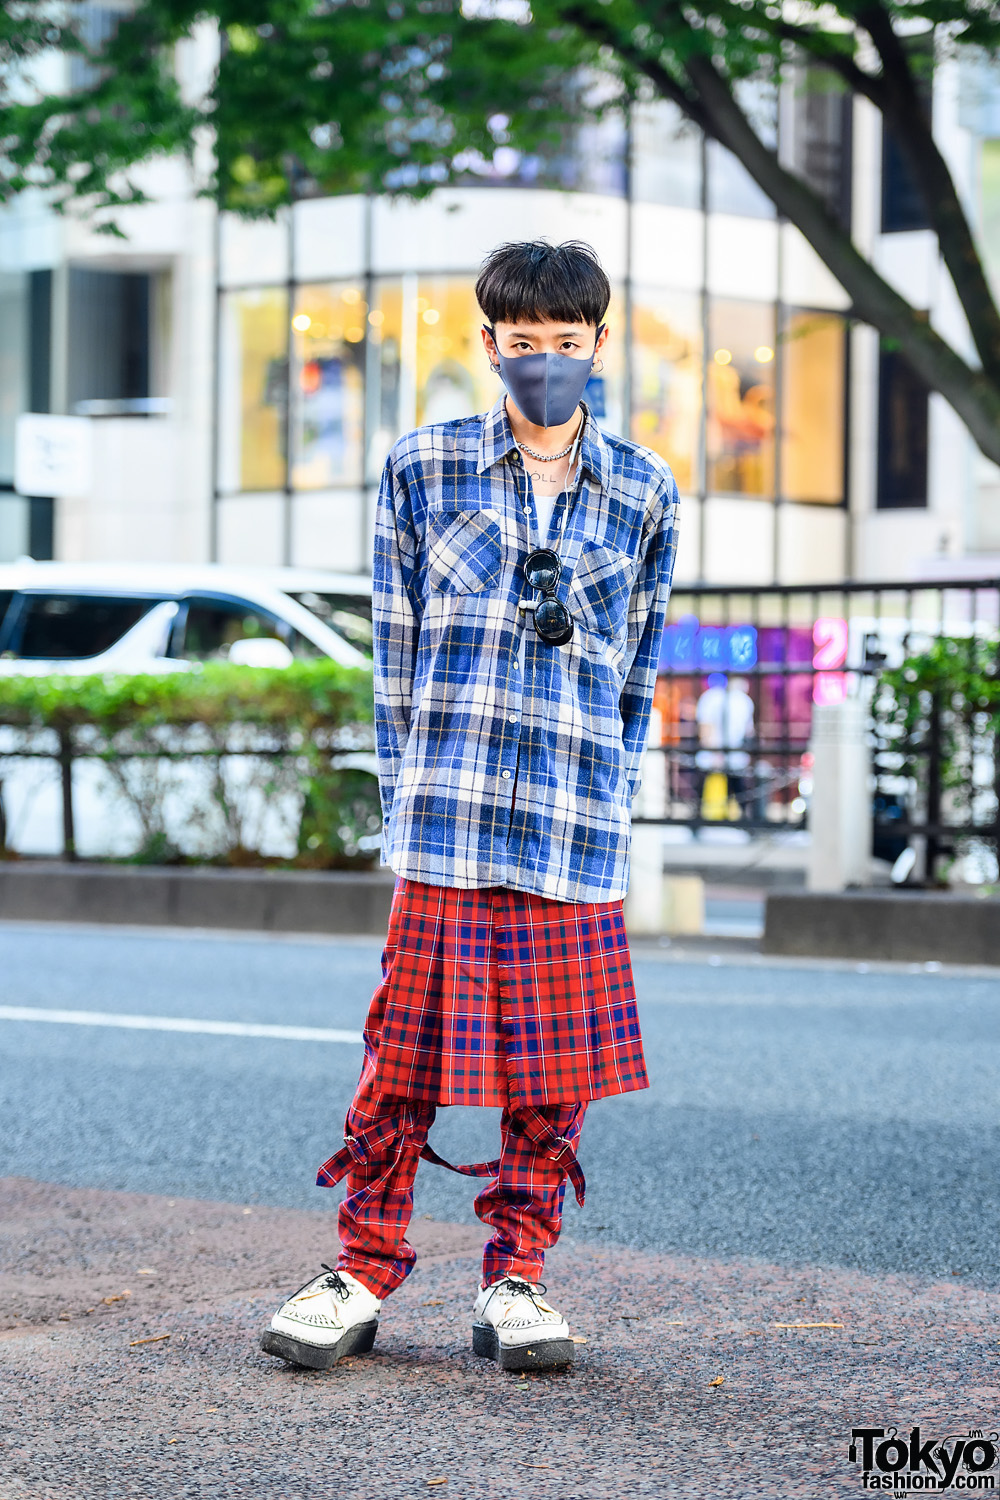 Anrealage Crew in Mixed Plaid Fashion w/ Resale Blue Plaid Shirt, 666 Red Plaid Pants w/ Skirt Detail, George Cox Creeper Shoes & N. Hoolywood Silver Accessories